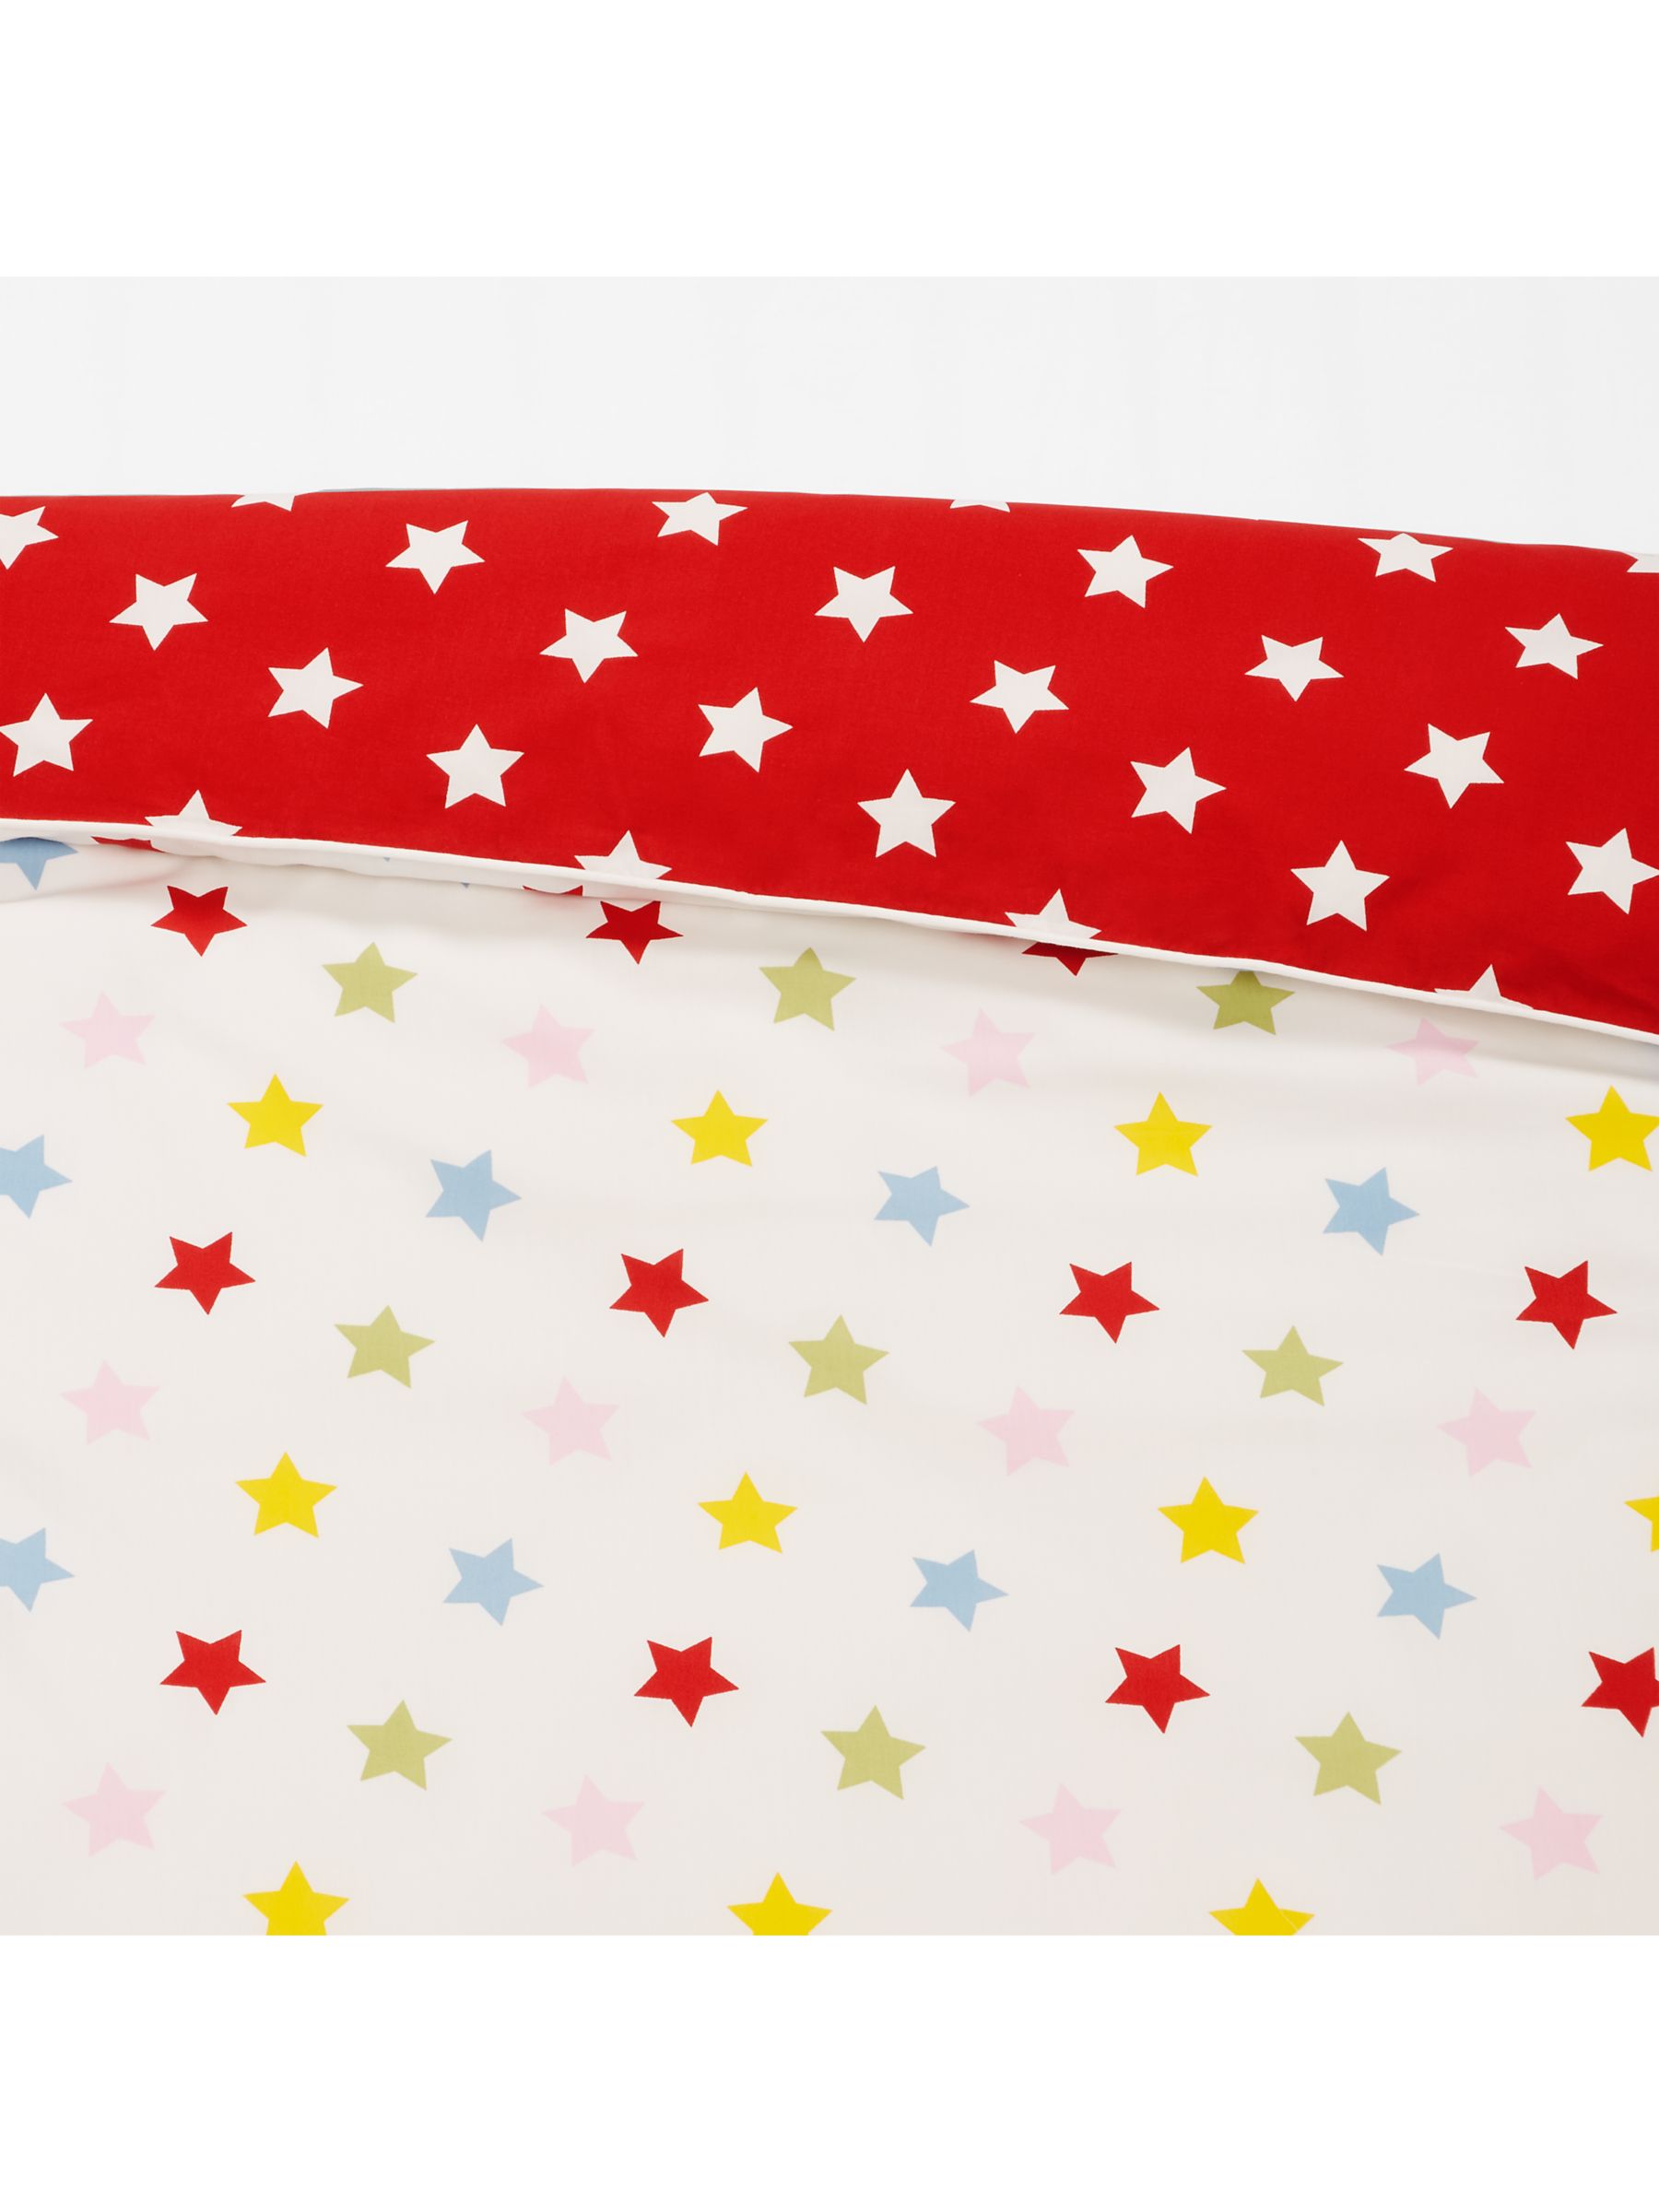 Little Home At John Lewis Star Reversible Duvet Cover And